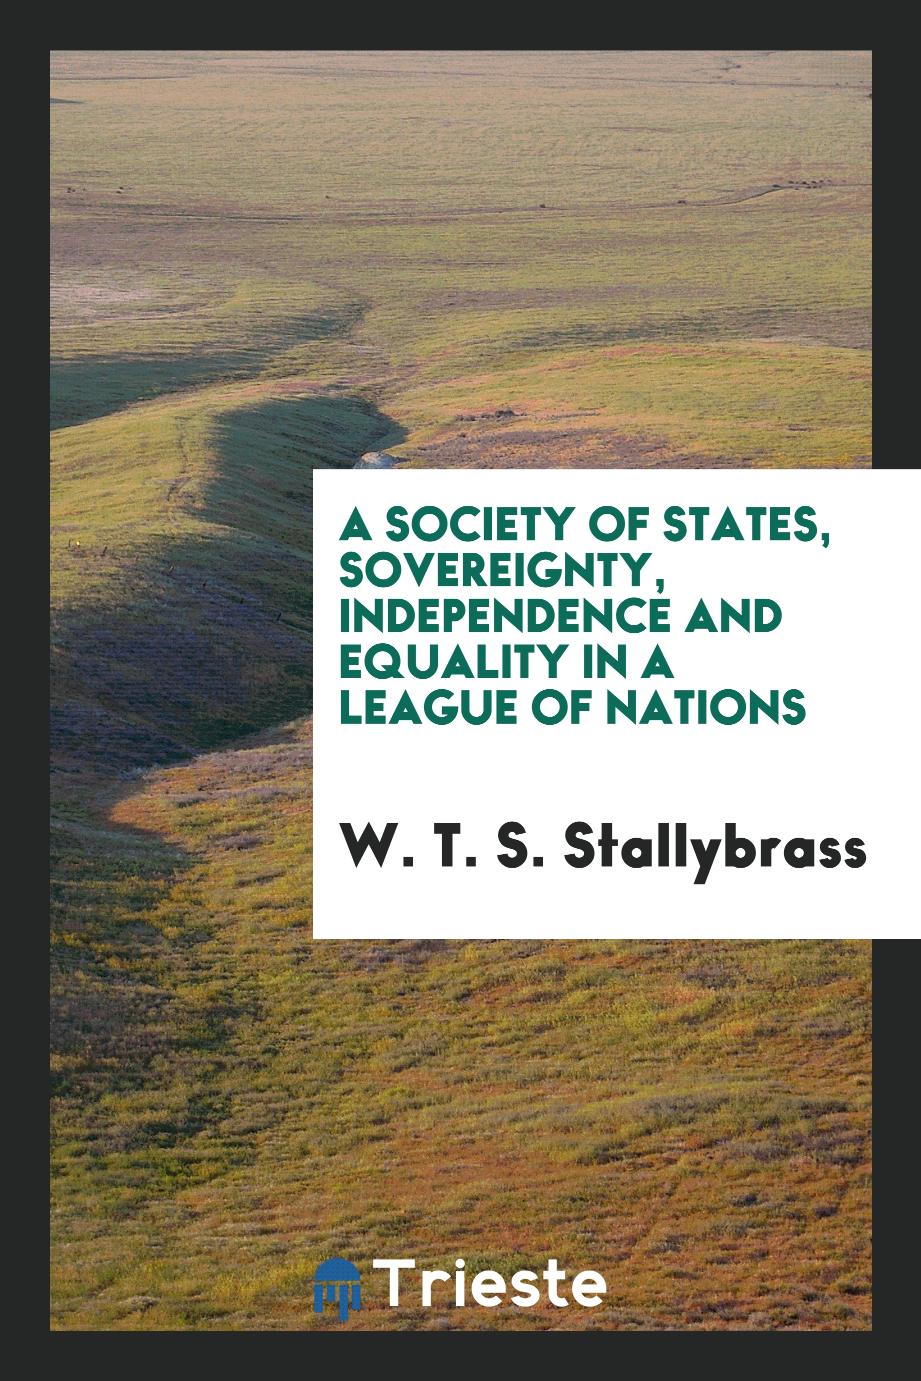 A Society of States, Sovereignty, Independence and Equality in a League of Nations